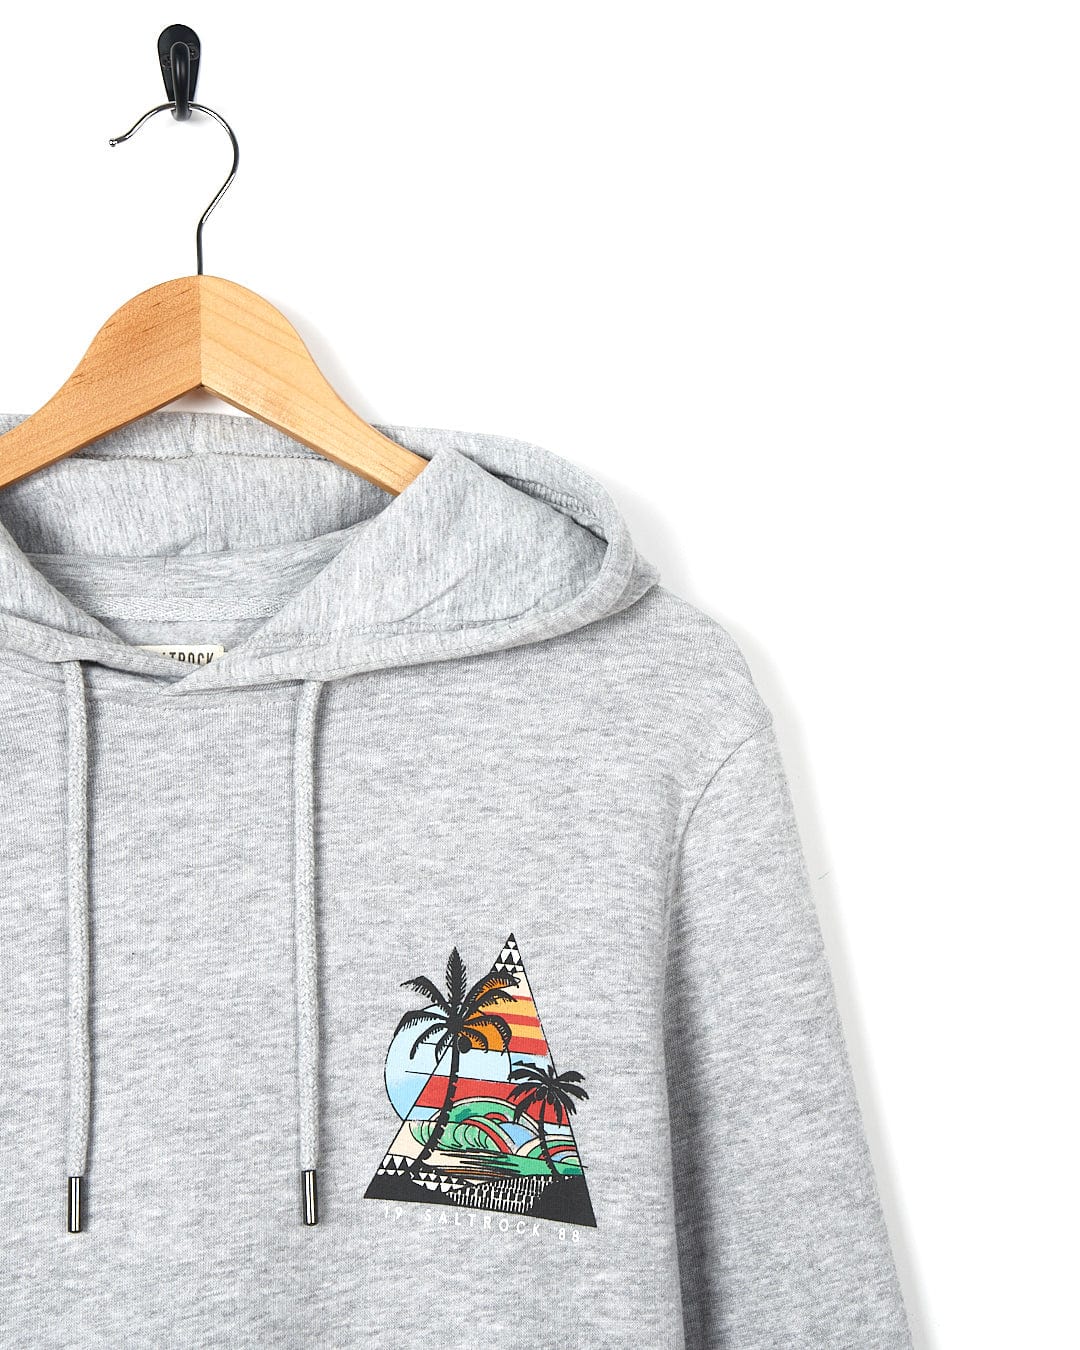 A Geo Beach - Mens Pop Hoodie - Grey with an image of a palm tree and a palm tree from Saltrock.